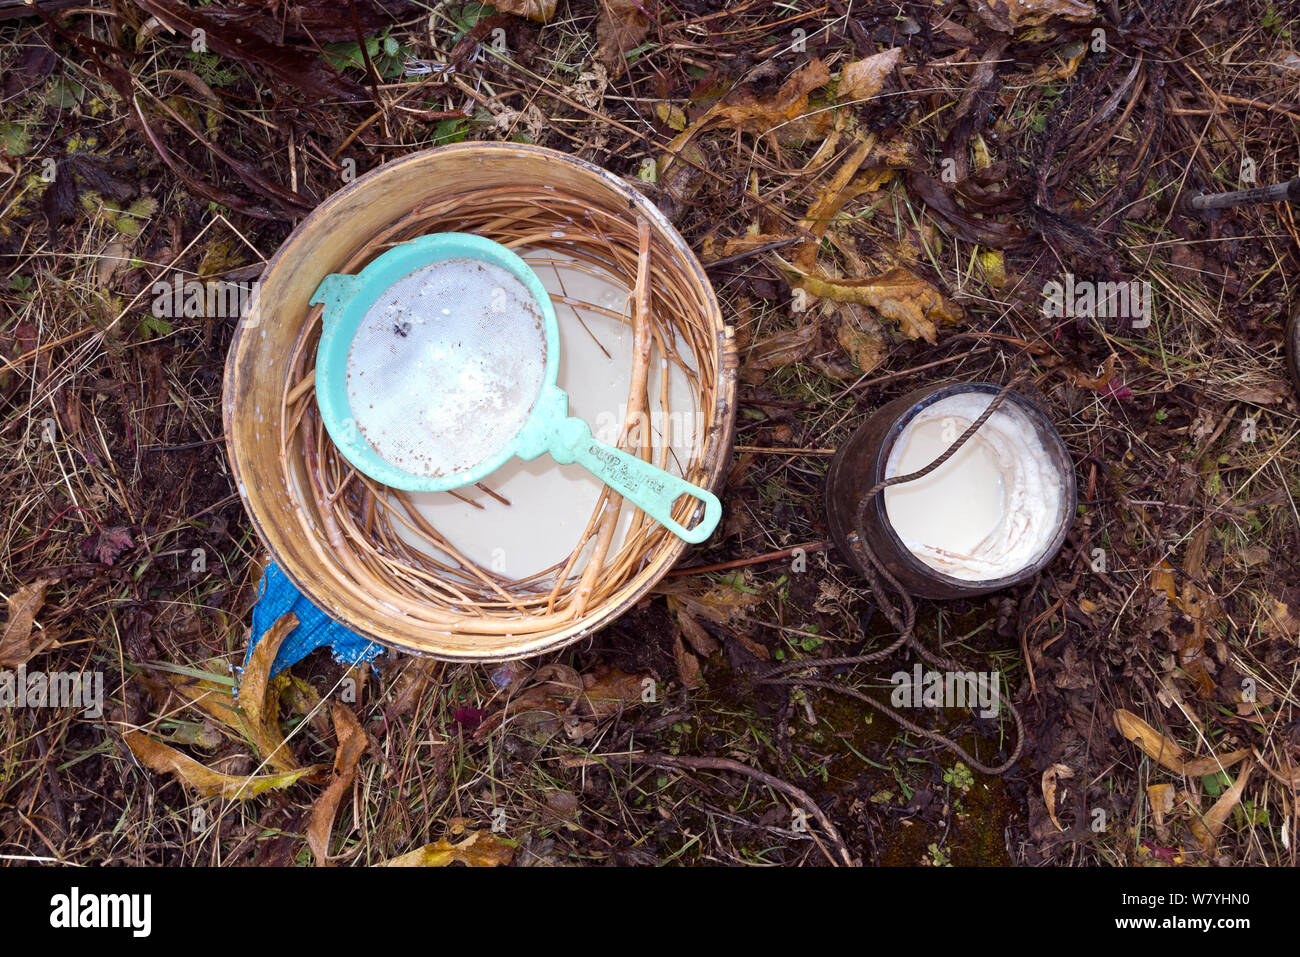 Making yak cheese by placing tree branches and yak milk in a bucket. Yak herders camp near the Soi Yaksa Valley, along the Jhomolhari trek. Bhutan, October 2014. Stock Photo